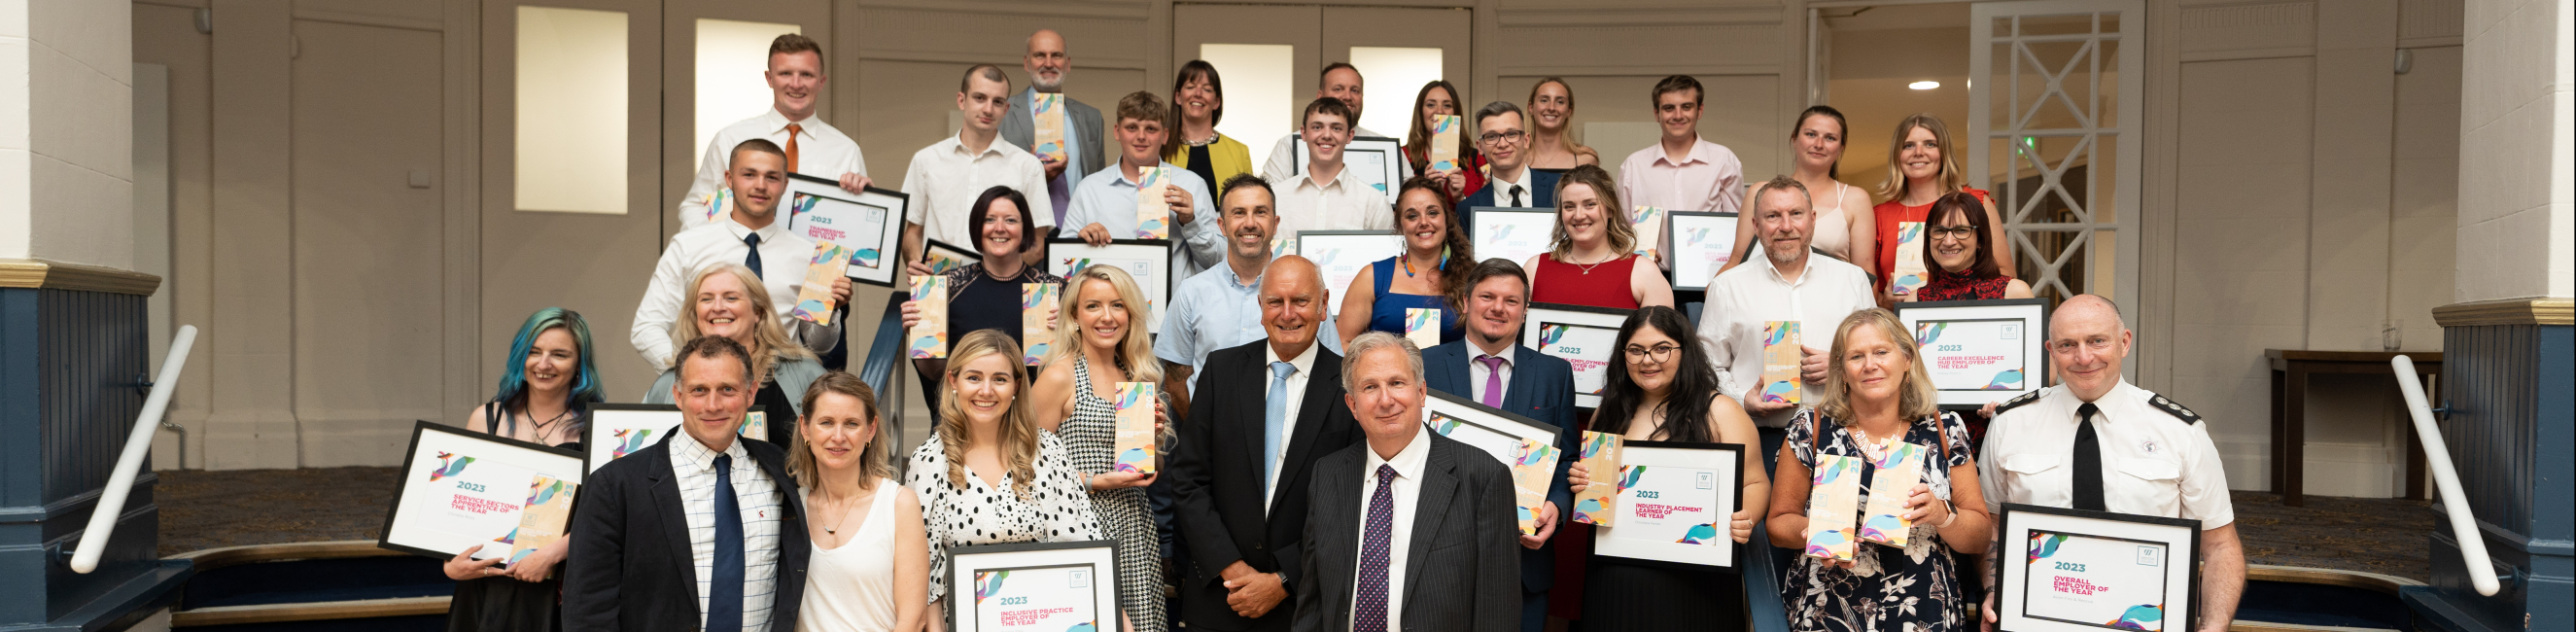 The winners of Weston College Business Awards gathered together on steps showcasing awards